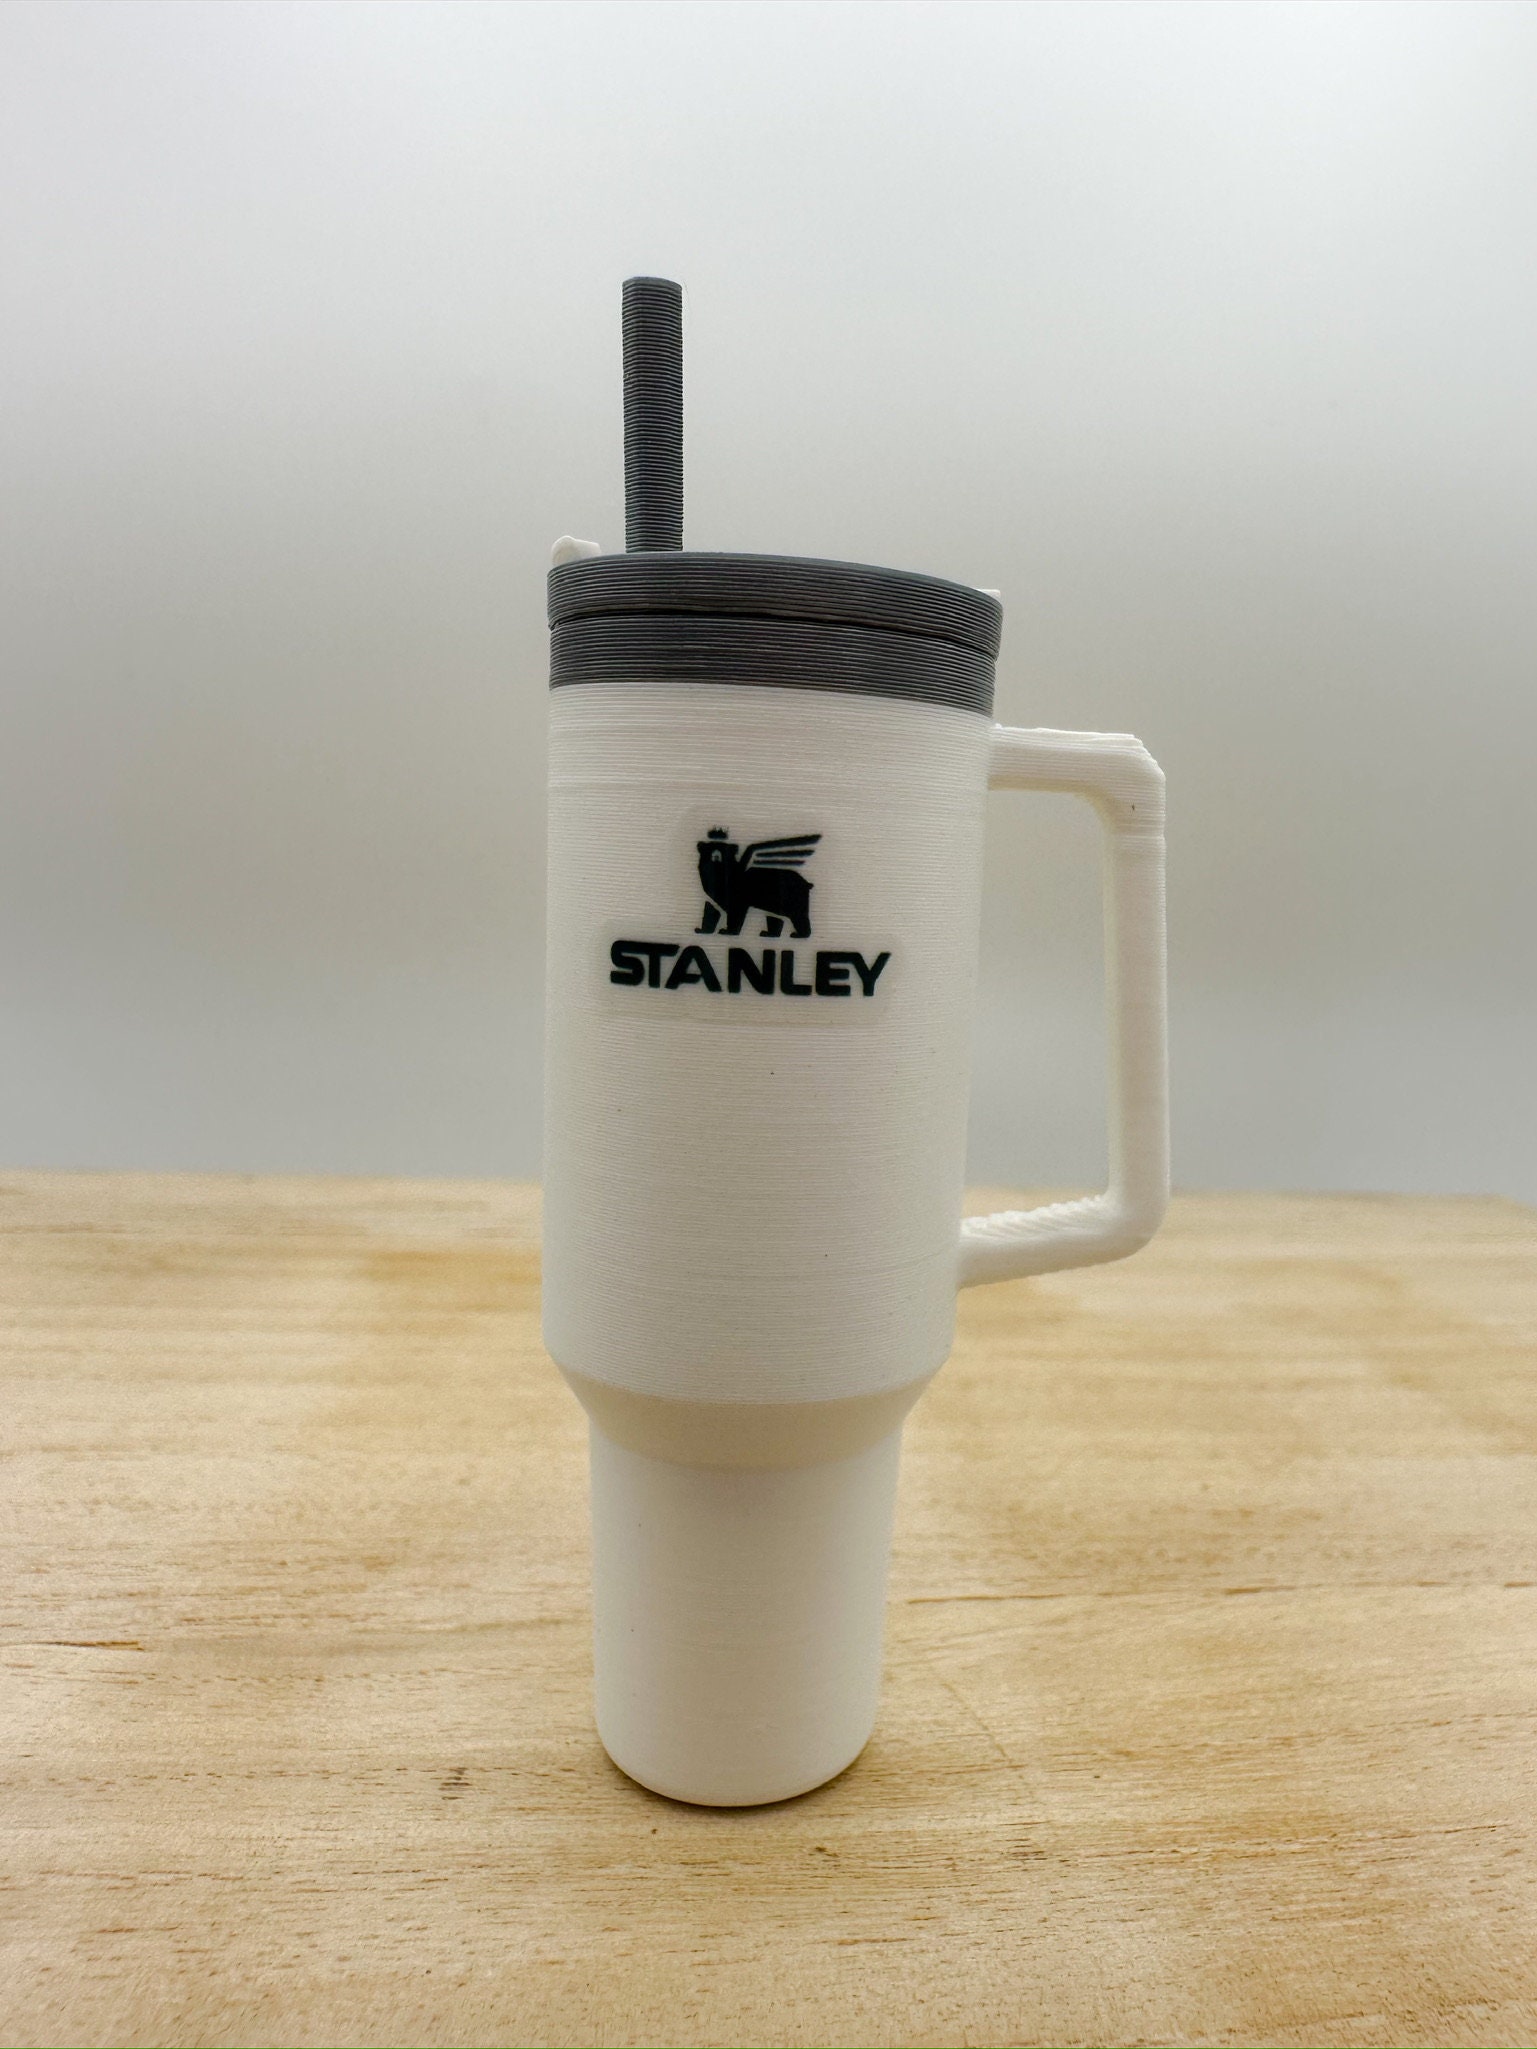 Stanley Inspired Miniature Tumbler Cup Keychain Key Accessory Ornament 